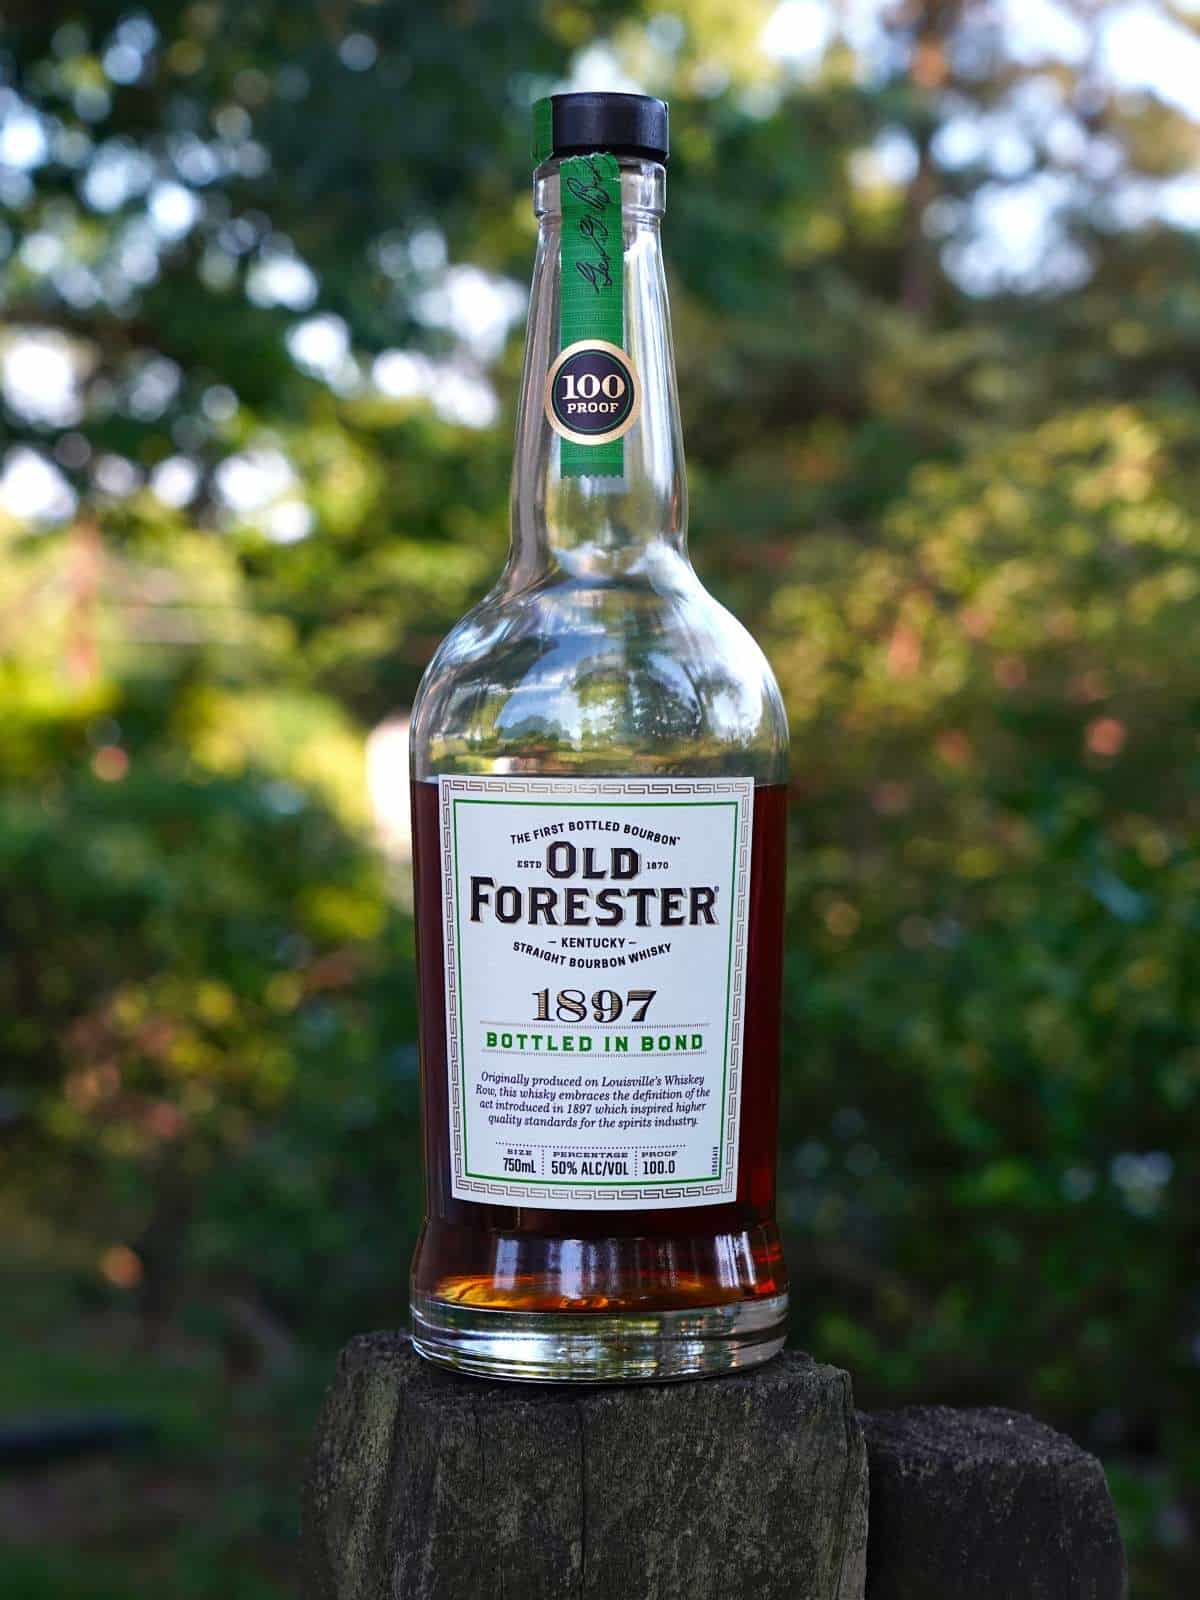 Old Forester 1897 bottled in bond featured